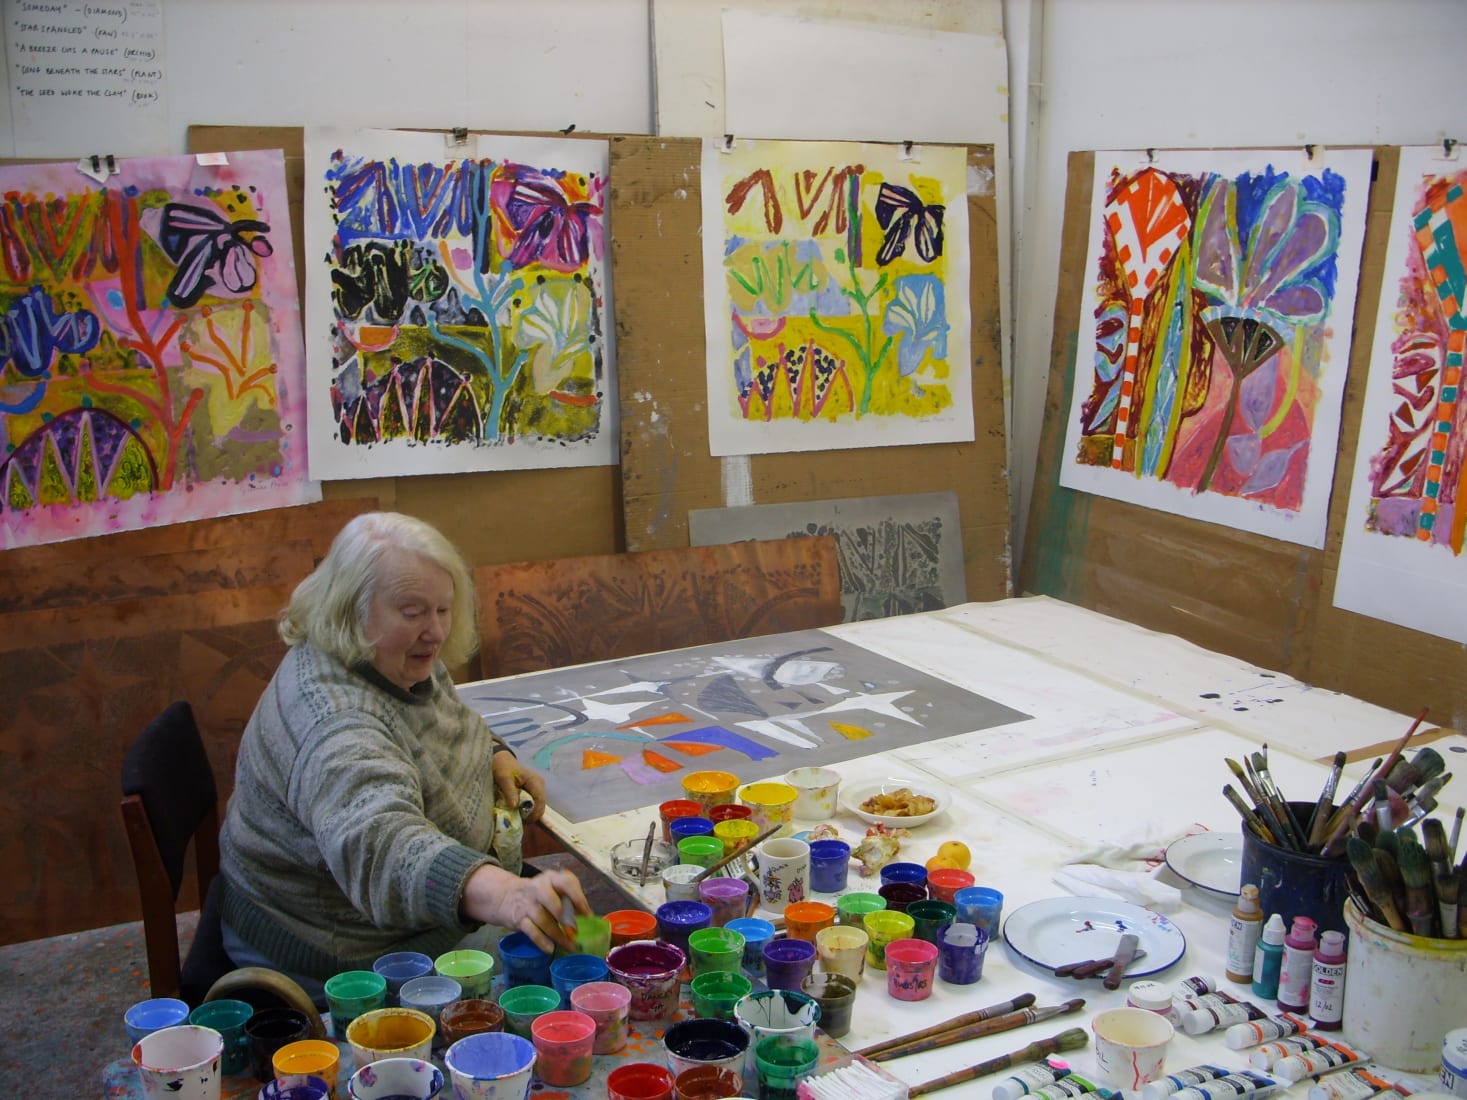 <p>Gillian Ayres at 107 Workshop, Wiltshire, 2010. Photo: Andrew Smith</p>